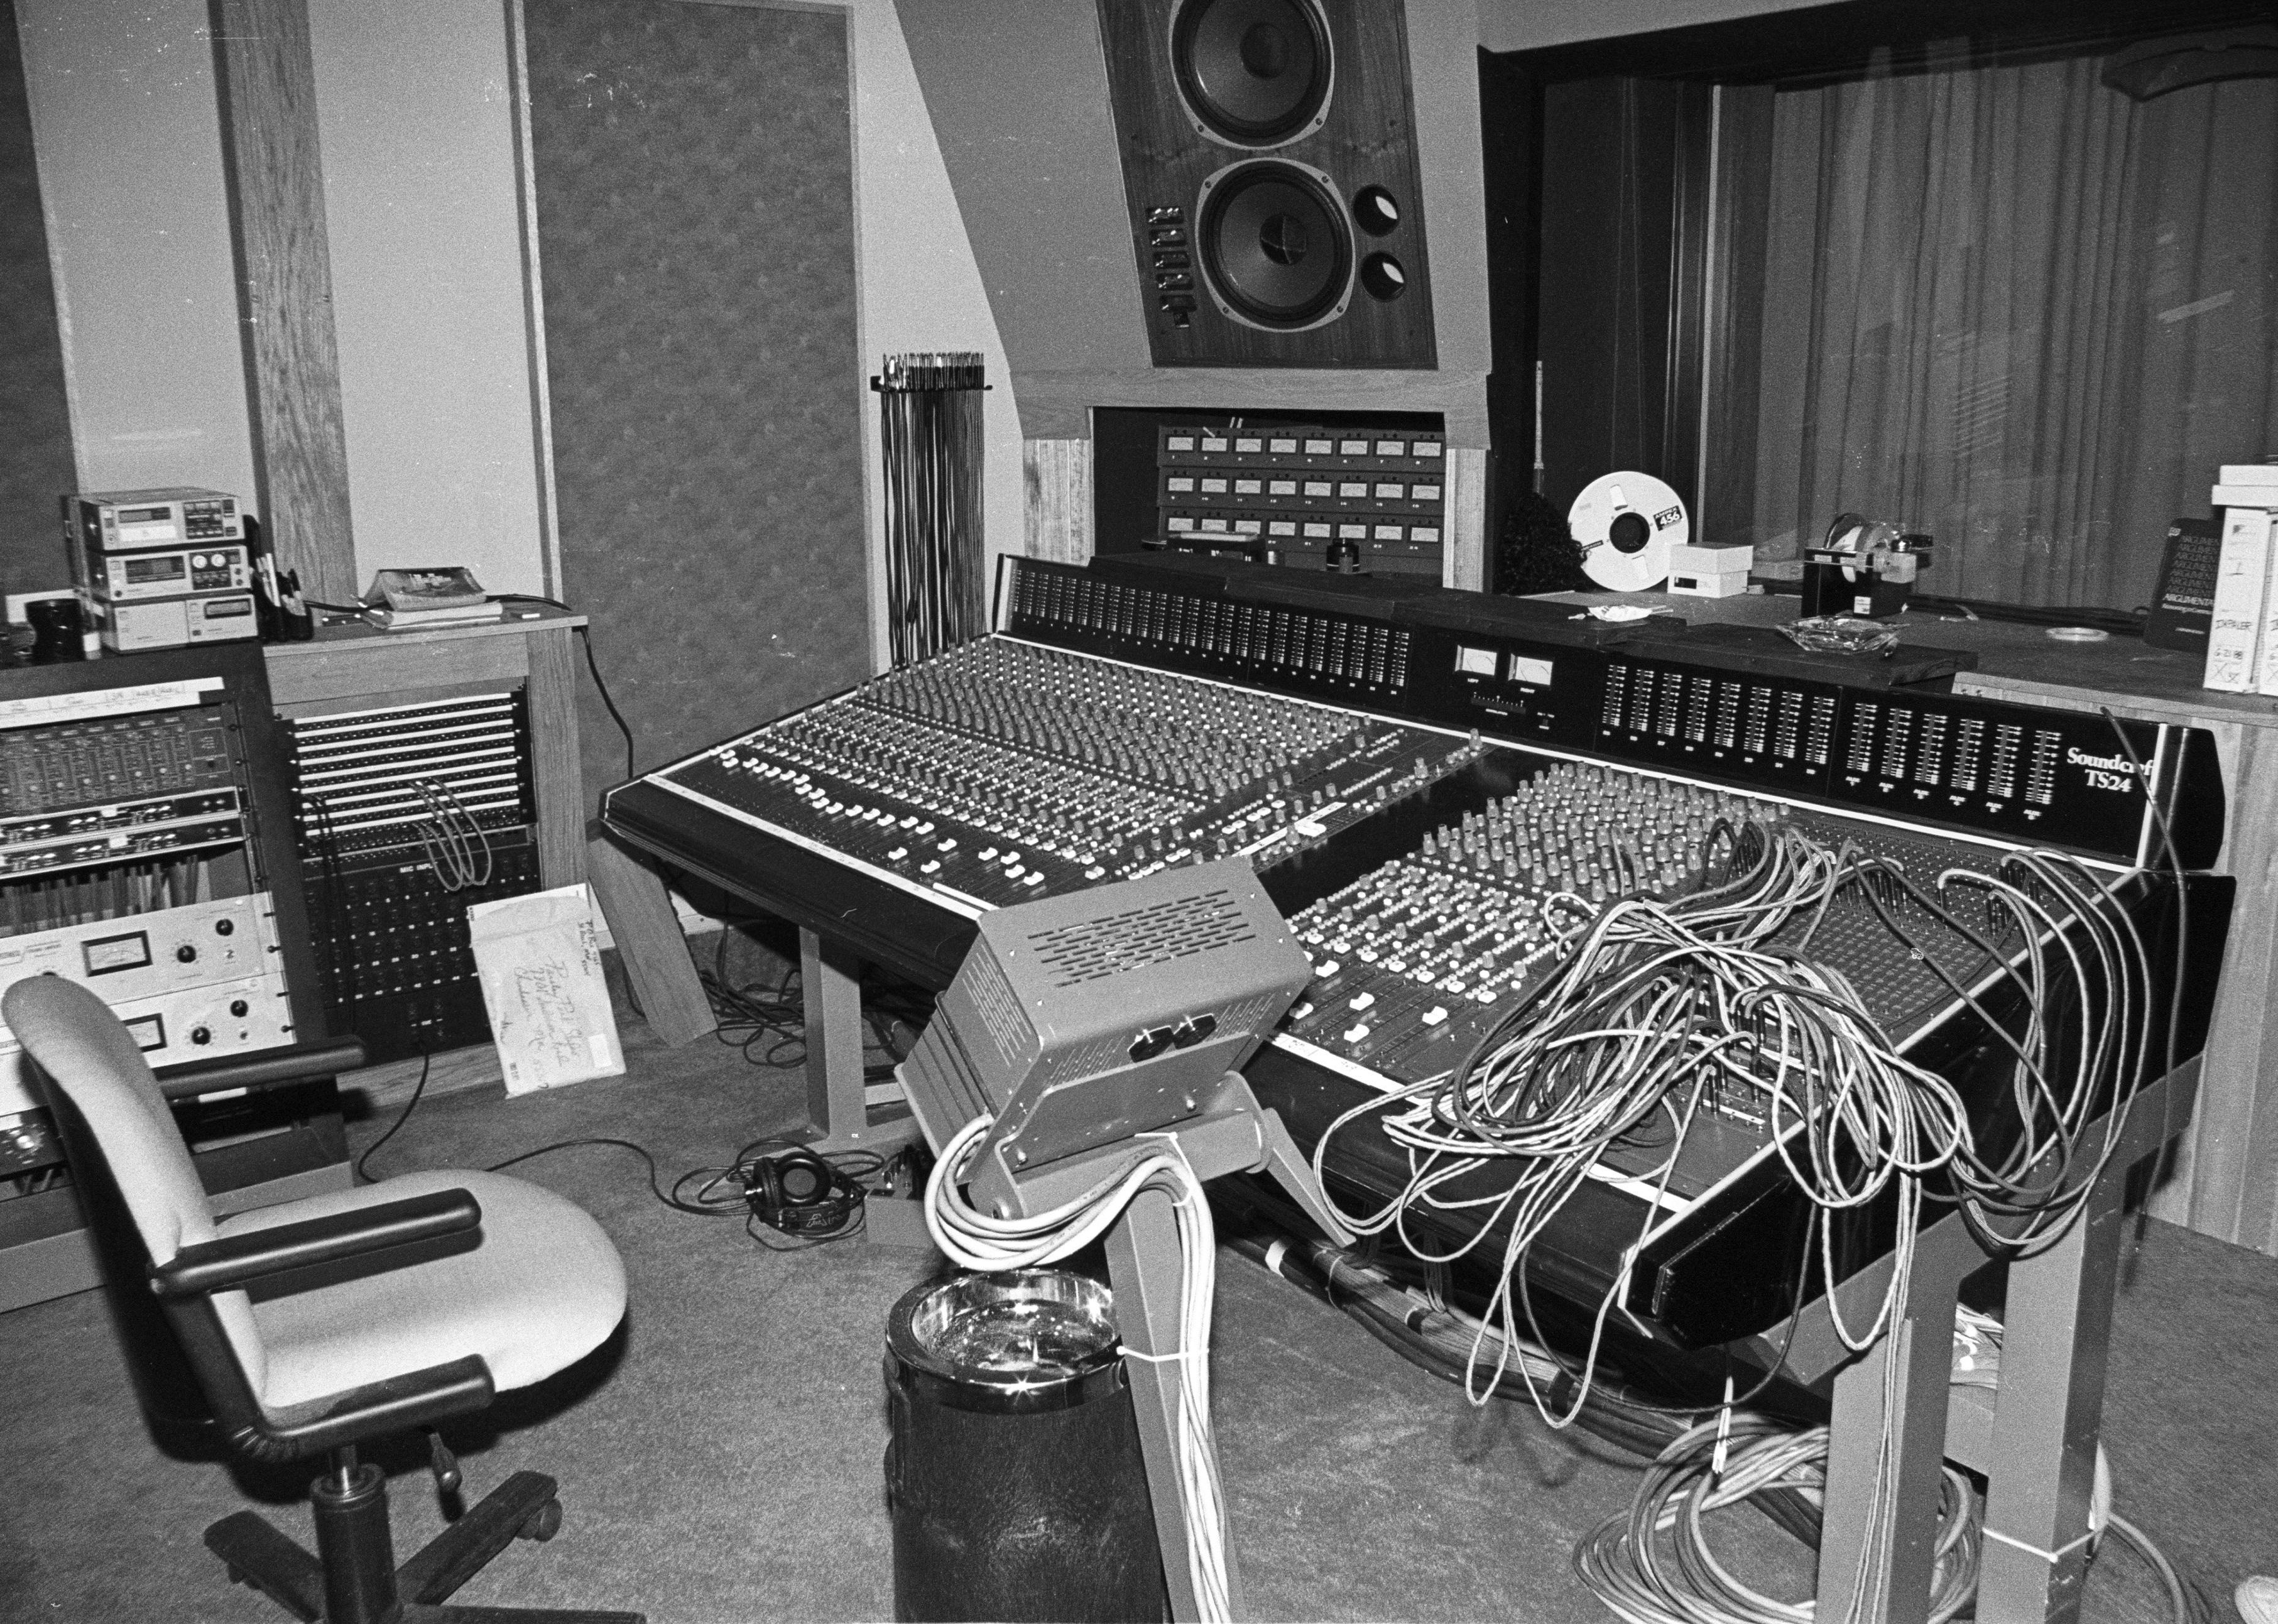 Prince's Paisley Park Studios just after completion in Chanhassen, Minnesota.